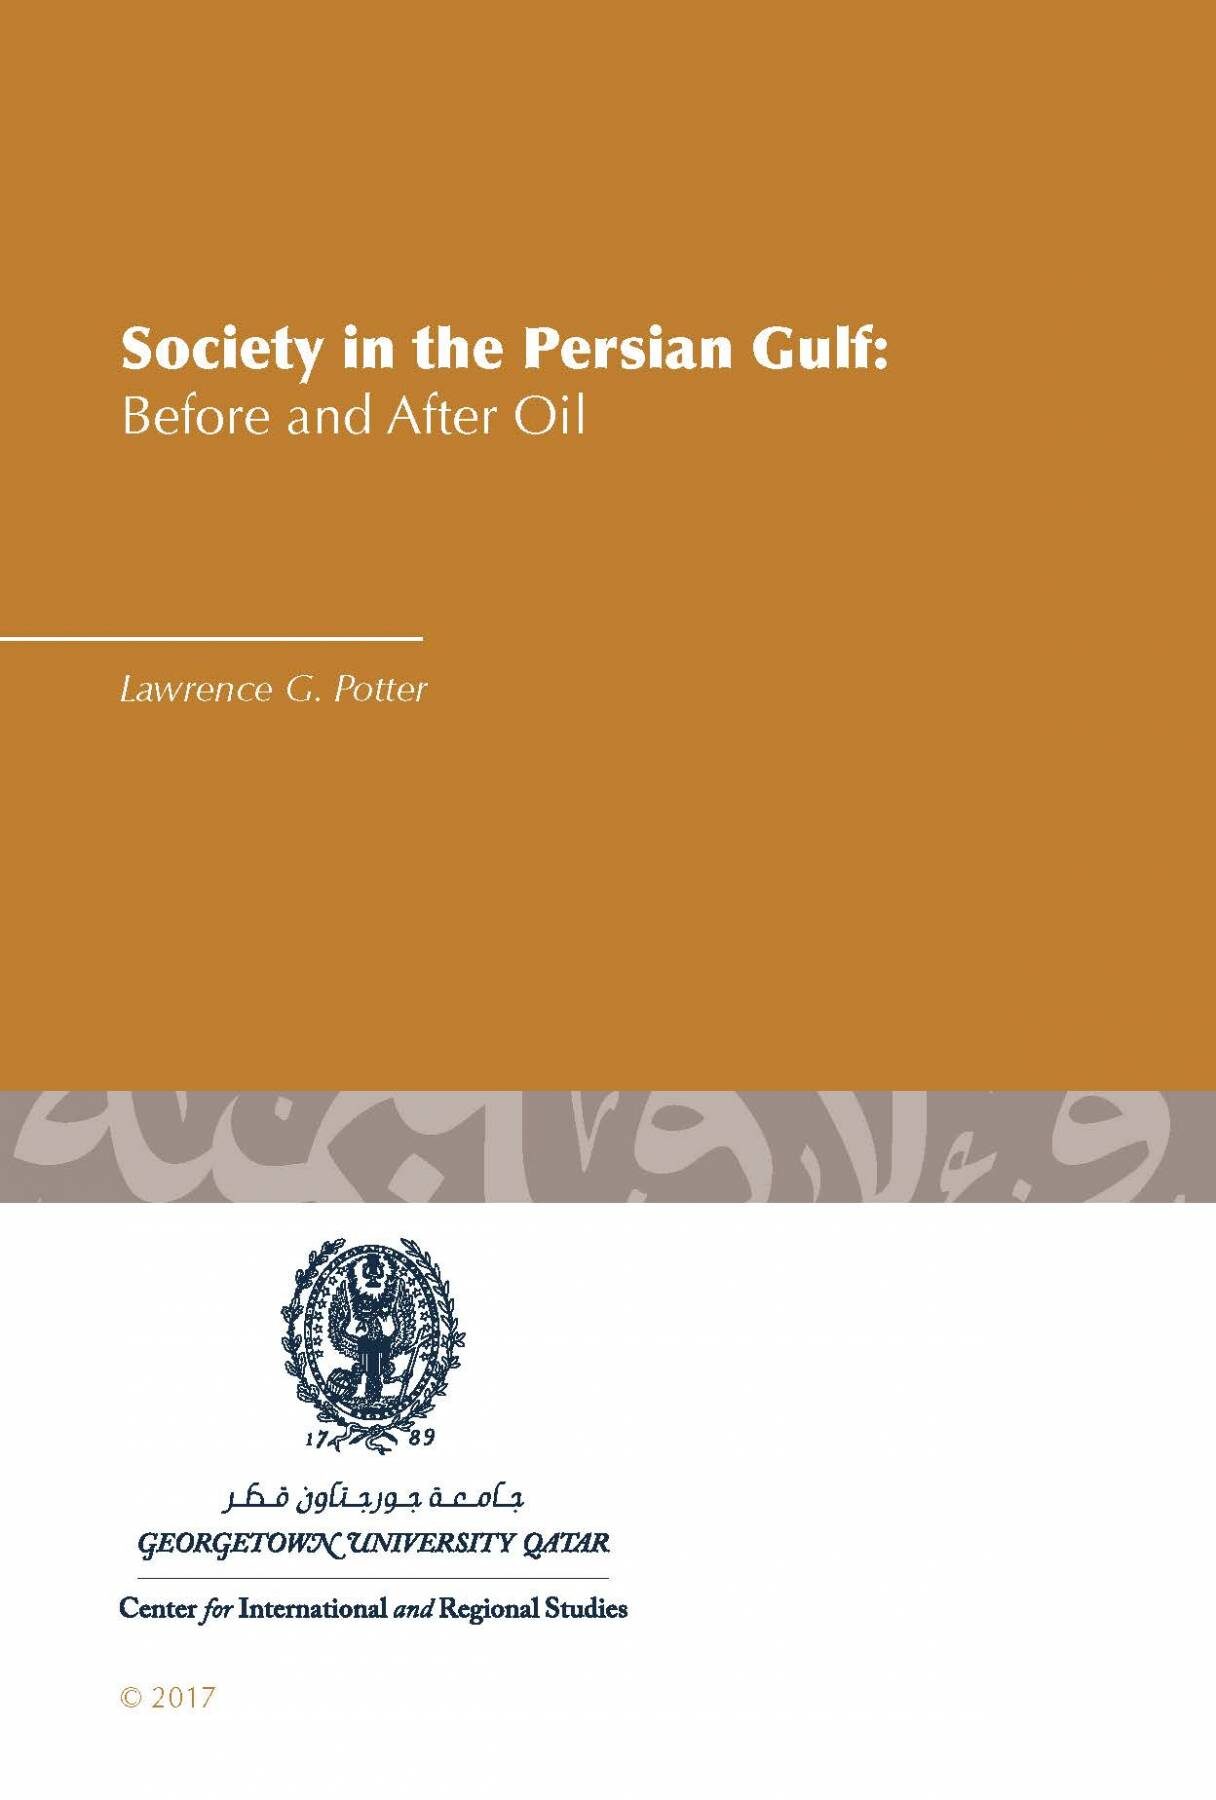 Society in the Persian Gulf: Before and After Oil